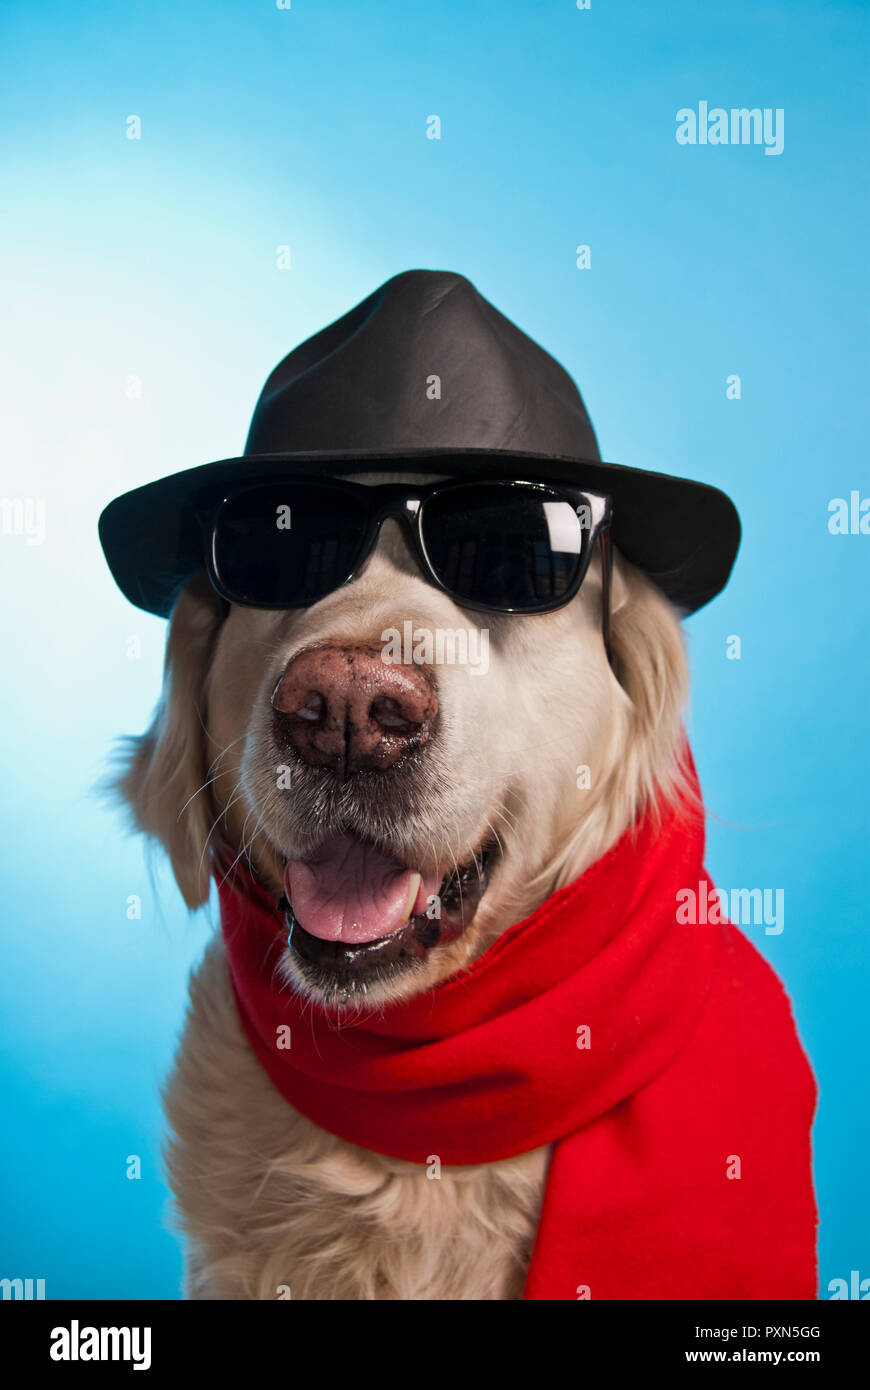 dog wearing sunglasses and hat